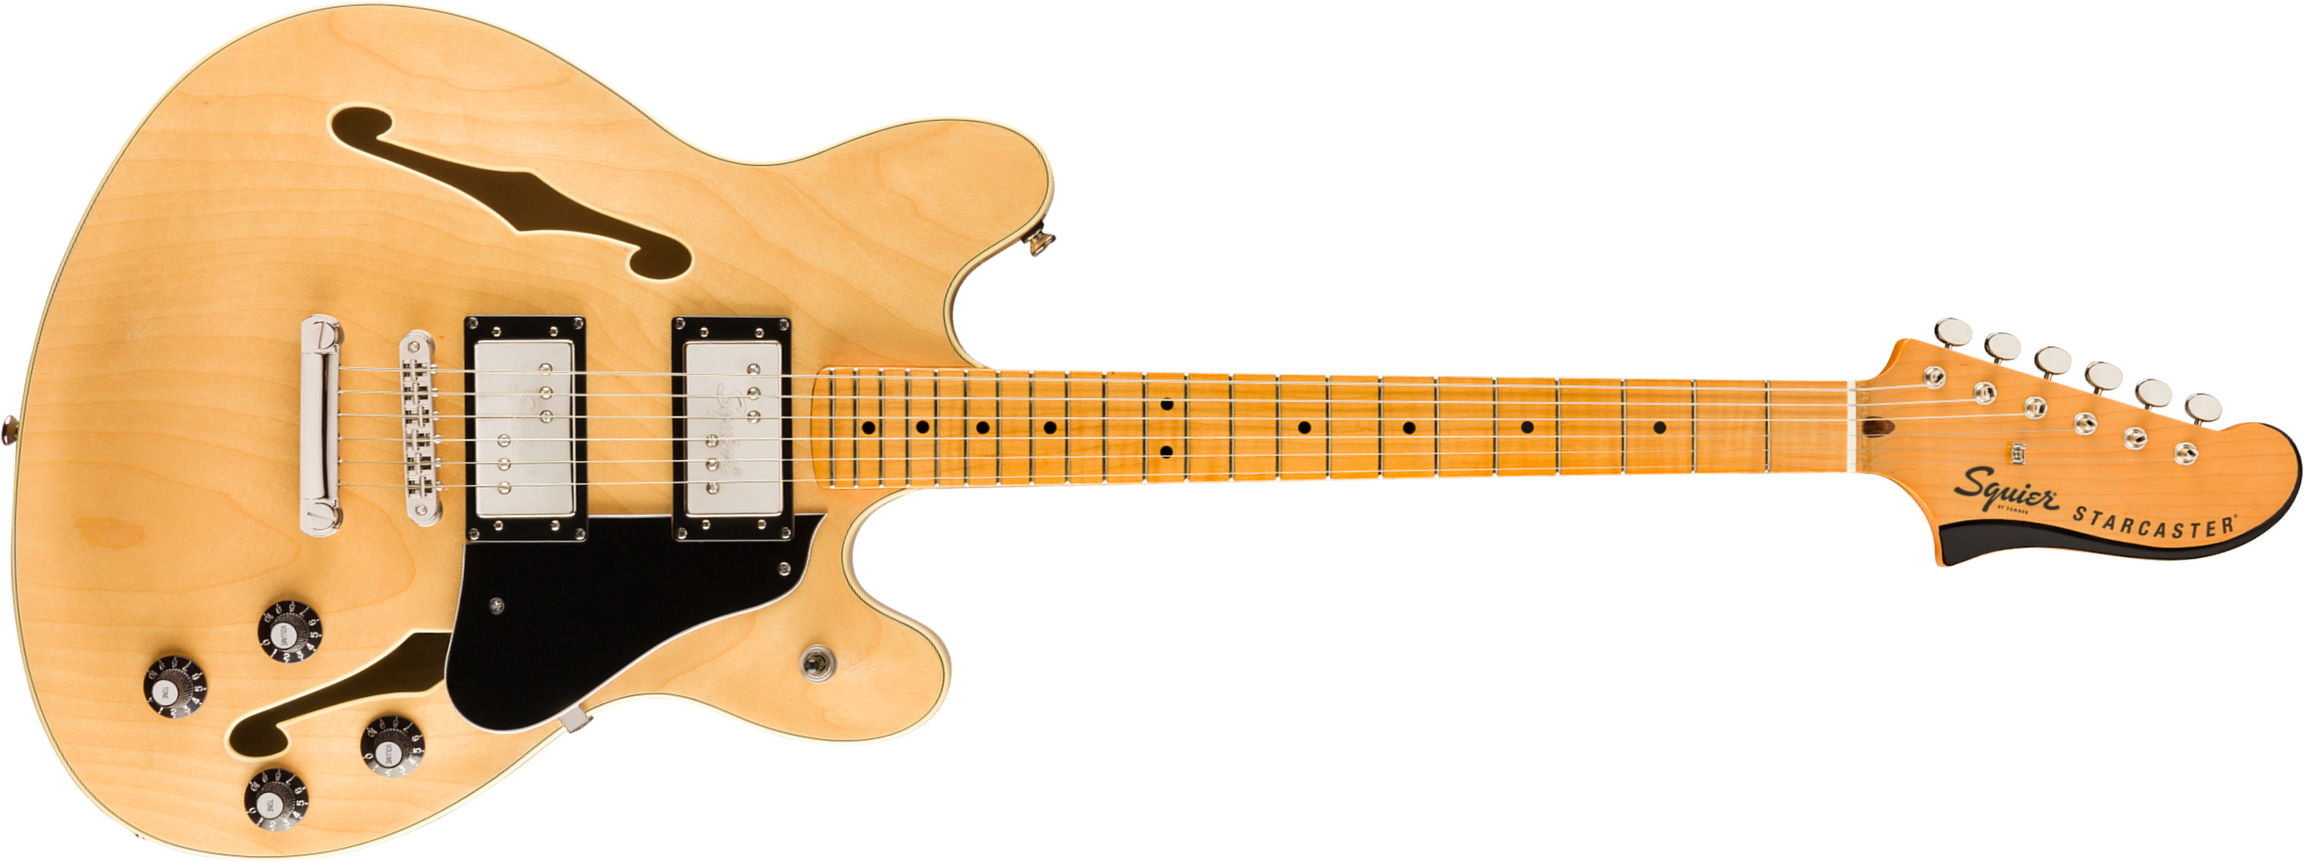 Squier Starcaster Classic Vibe 2019 Hh Ht Mn - Natural - Semi-hollow electric guitar - Main picture